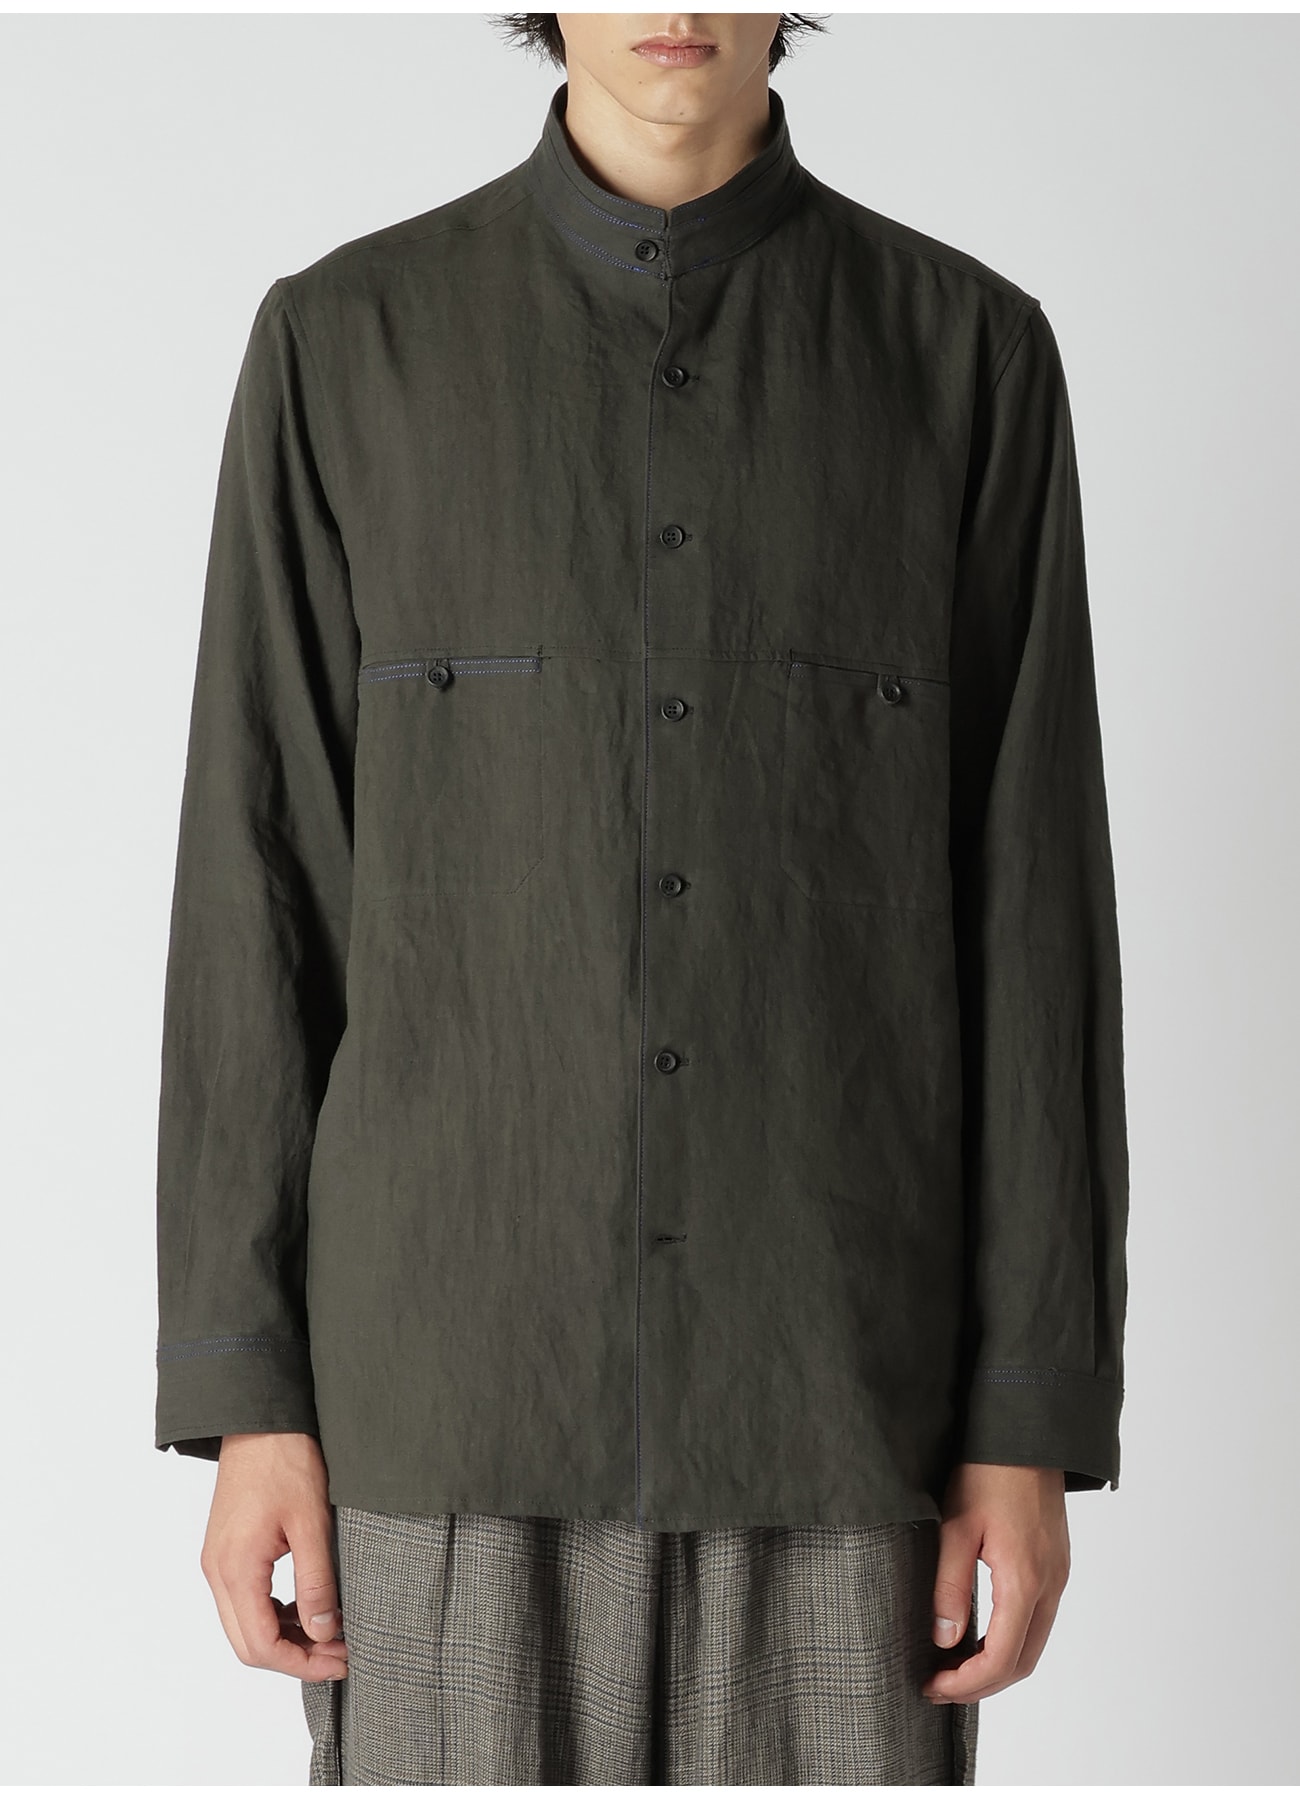 LINEN PAPER BROAD SHIRT WITH STAND COLLAR